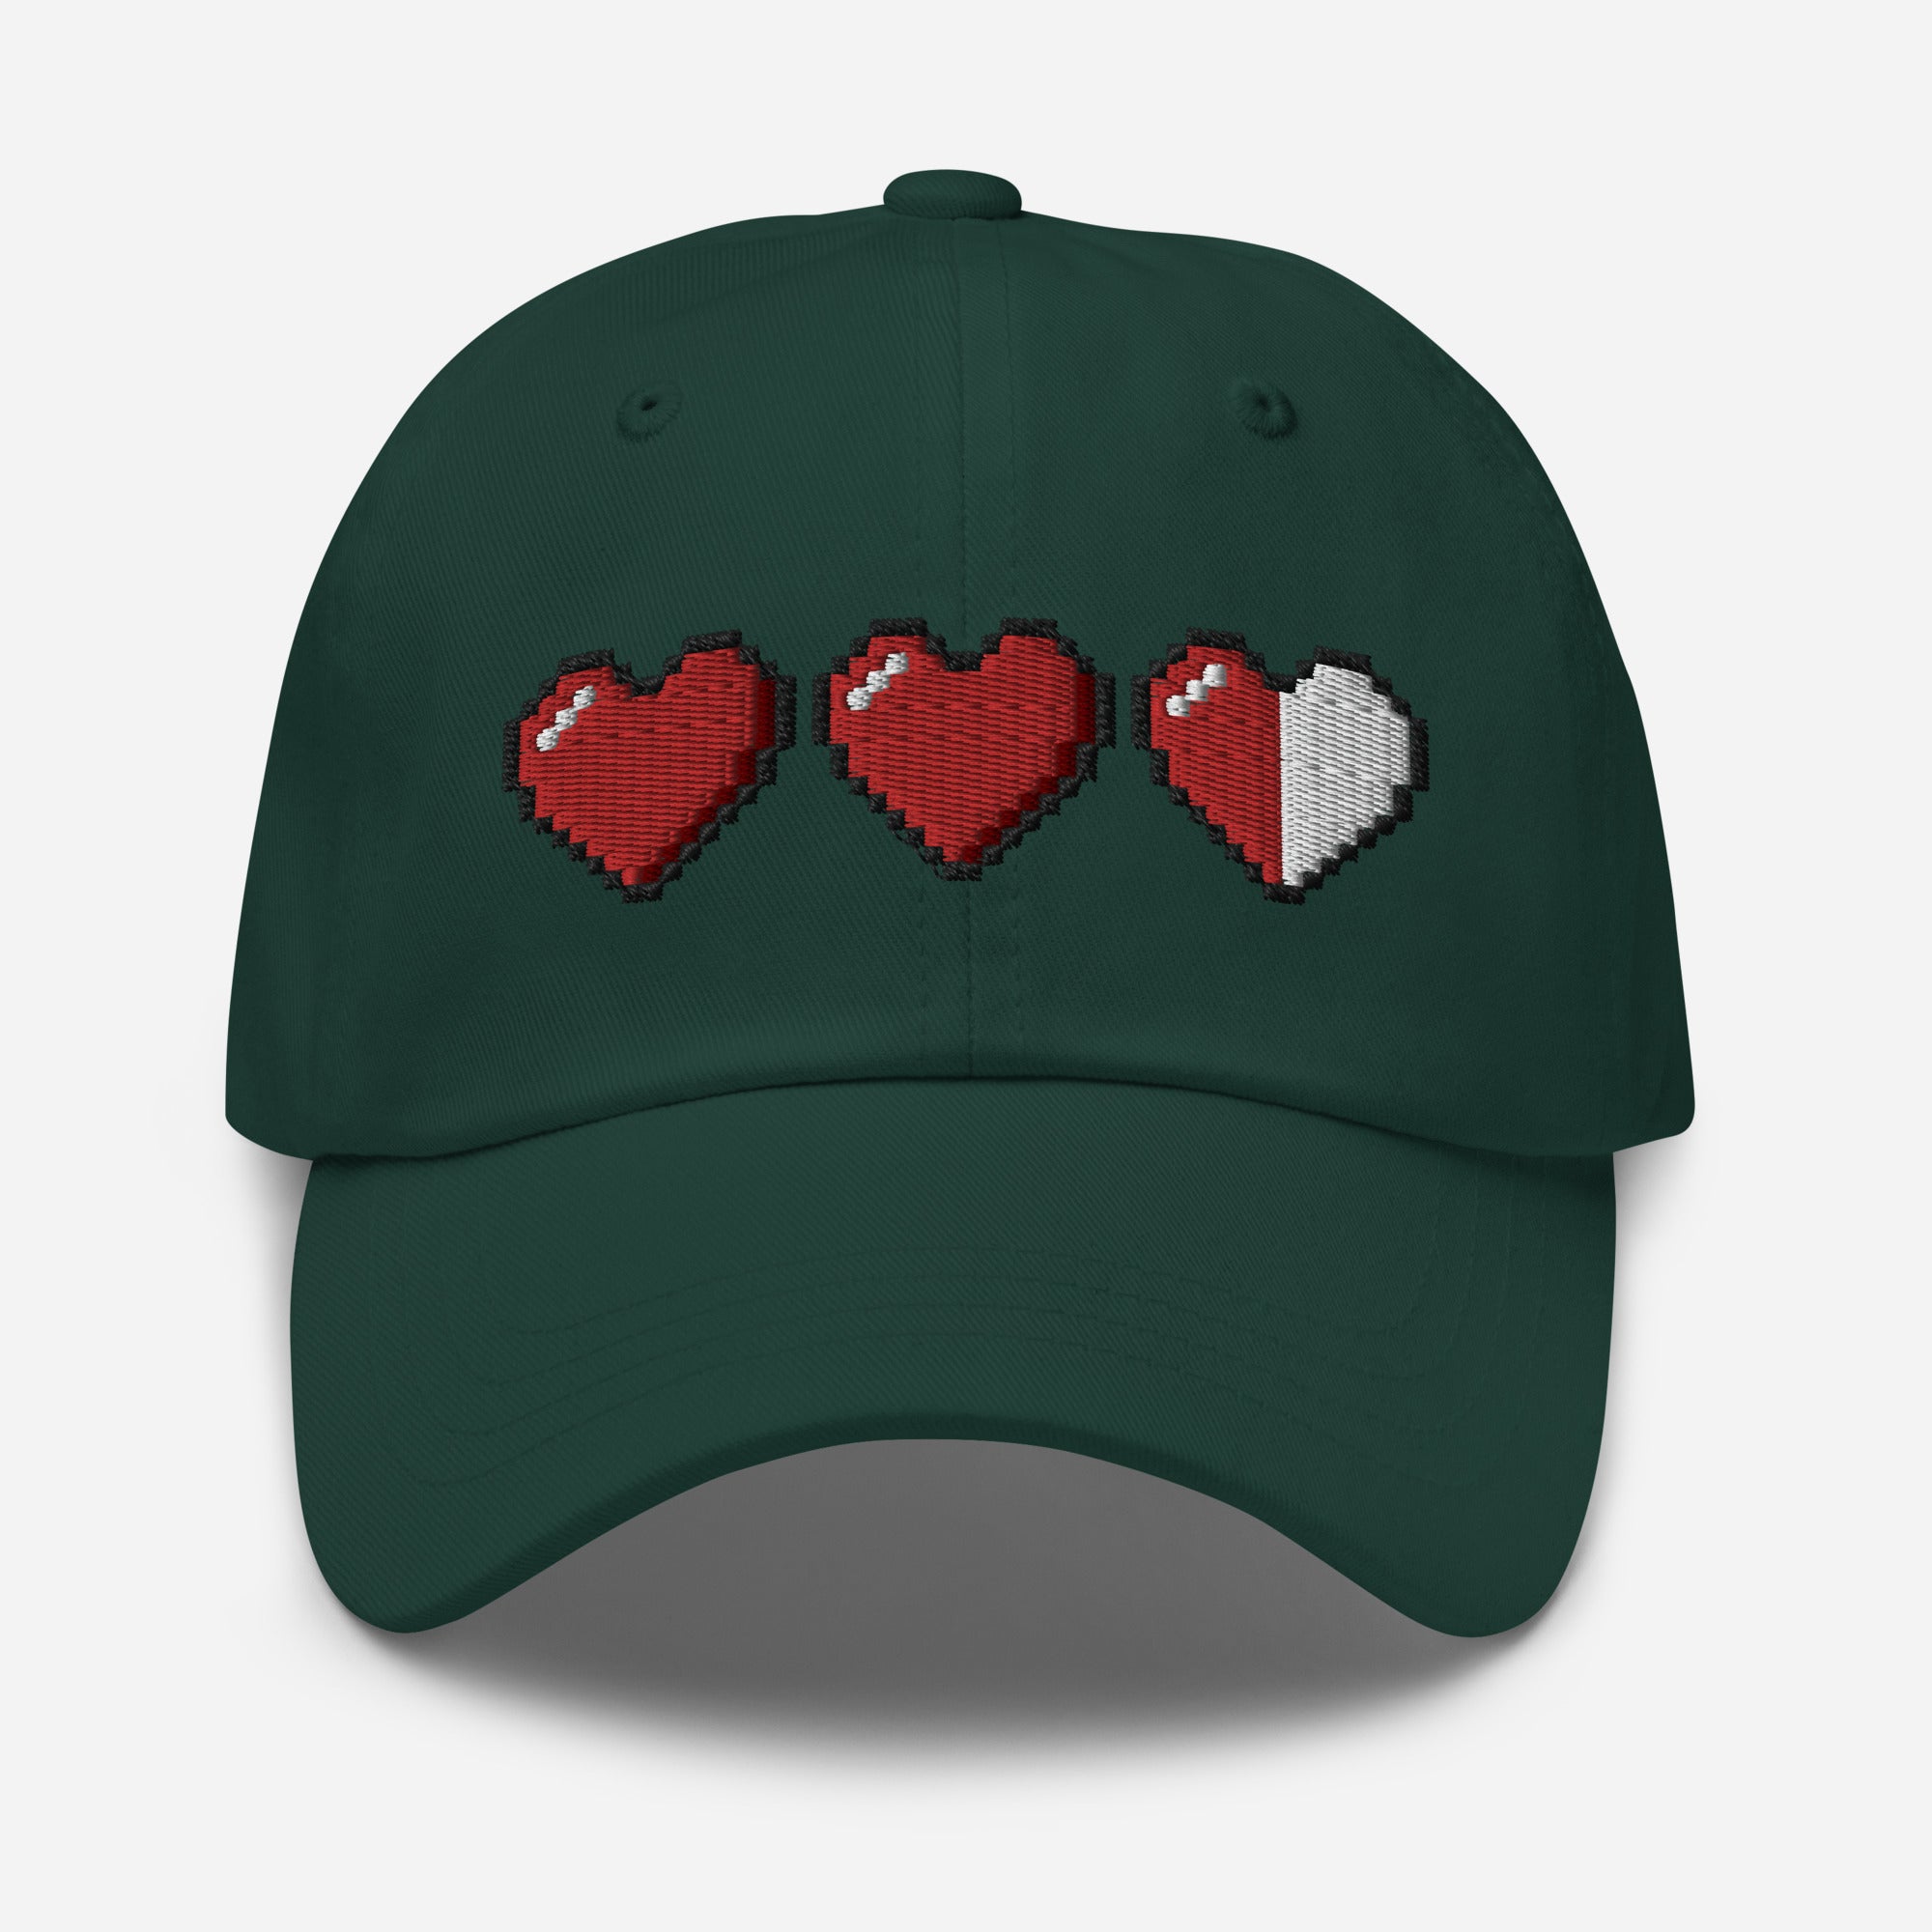 3 Heart Meter Retro 8 Bit Video Game Pixelated Embroidered Baseball Cap Dad hat